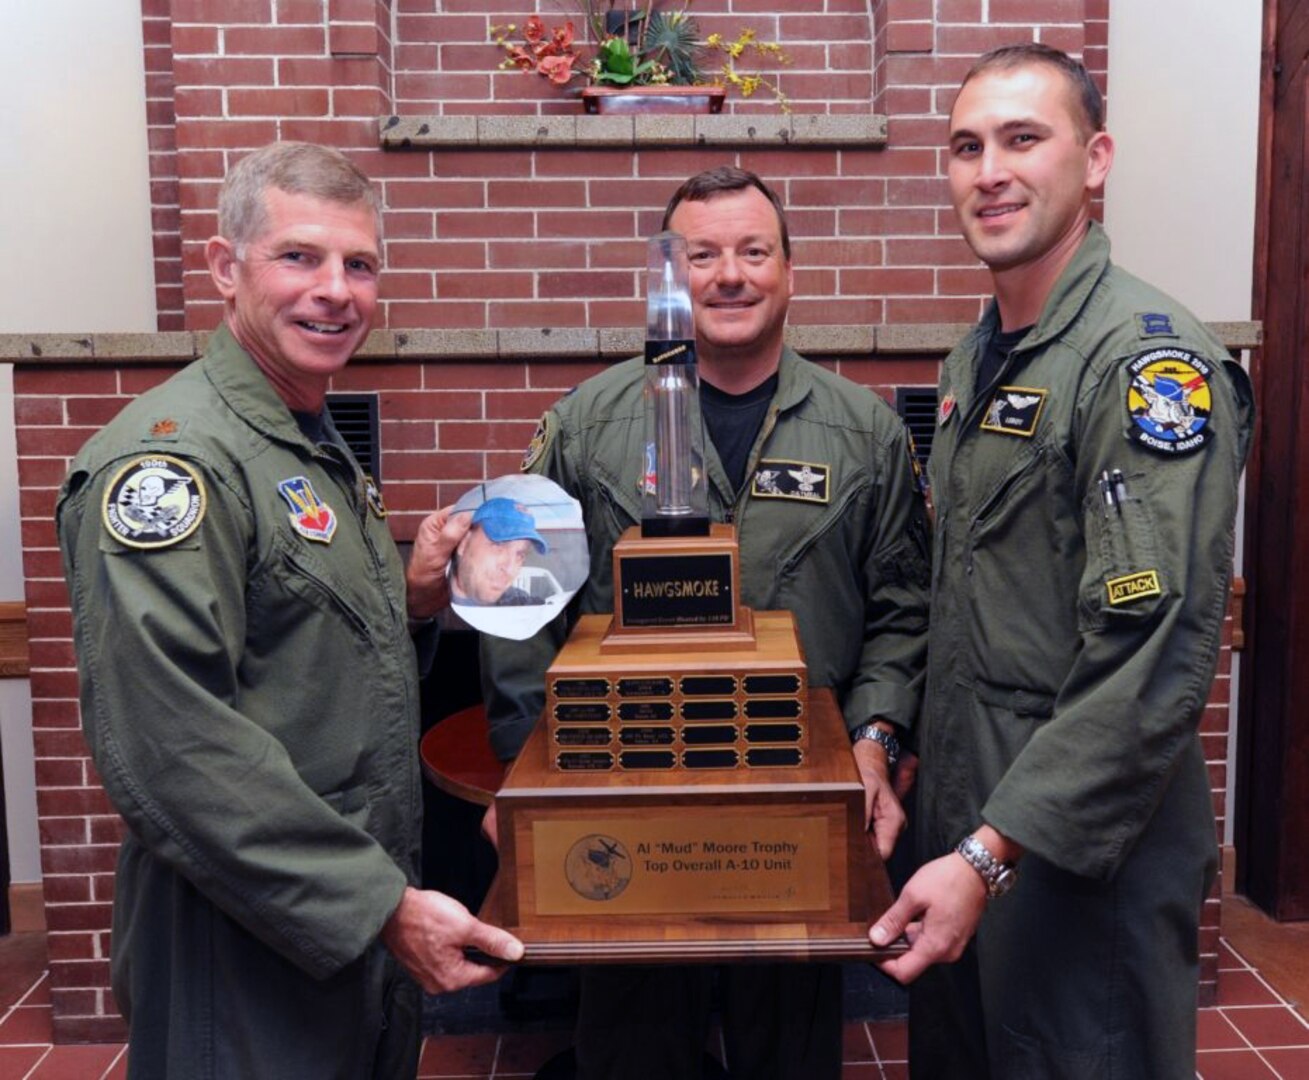 Members of the Idaho Air National Guard’s 190th Fighter Squadron from left to right, Maj. Scott Downey, Lt. Col. Ryan Odneal and Capt. Ryan Brown pose with the trophy that they won during Hawgsmoke 2010 at Gowen Air National Guard Base in Boise, Idaho, Oct. 16, 2010. Missing from the photo, but pictured in a photo cutout, is Maj. Justin Keskey.